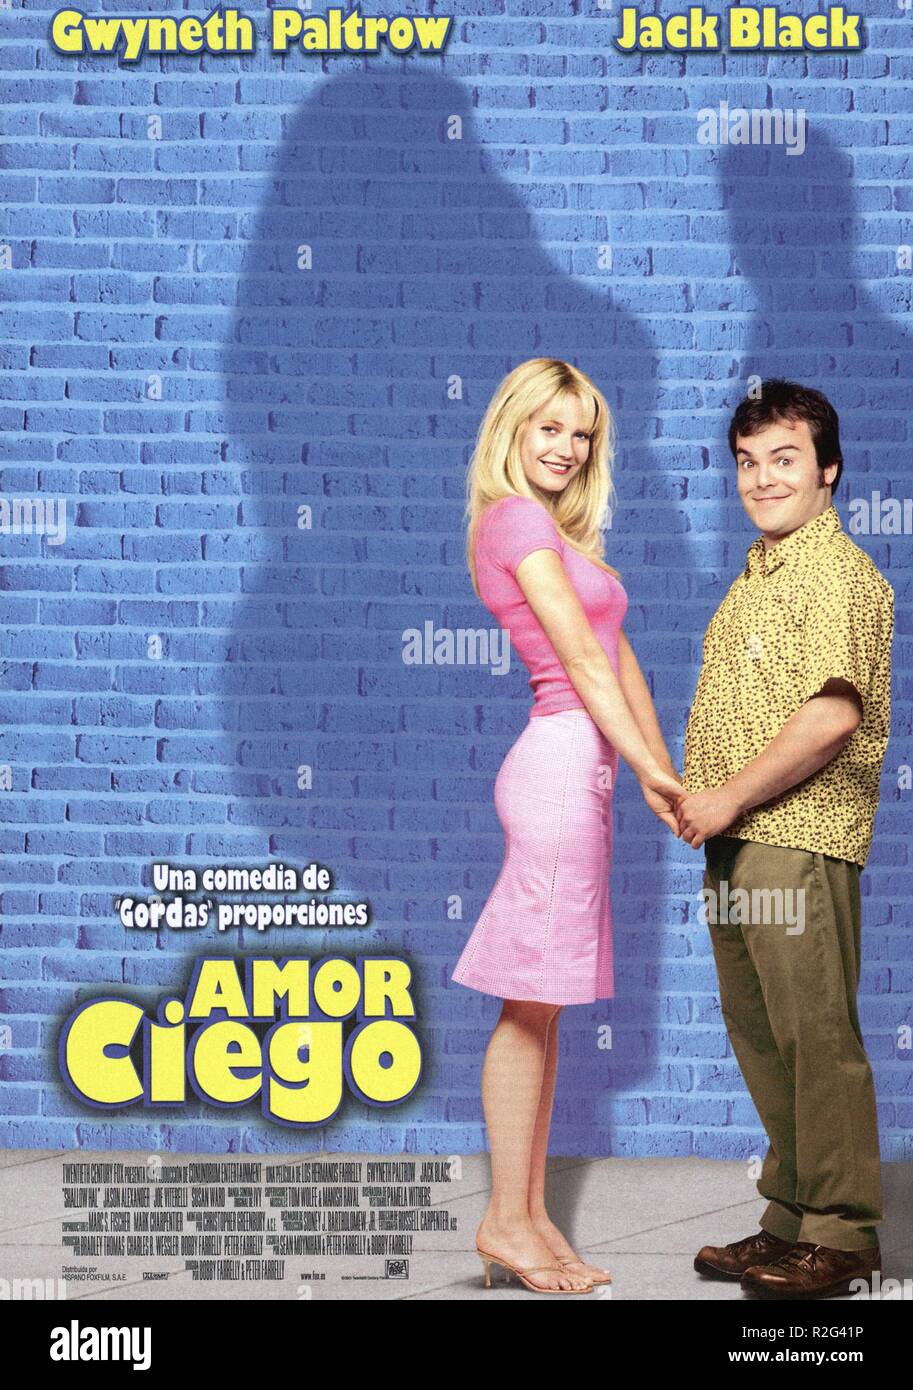 Shallow Hal Year : 2001 USA   Director : Bobby Farrelly Peter Farrell Gwyneth Paltrow, Jack Black Movie poster (Sp) Stock Photo